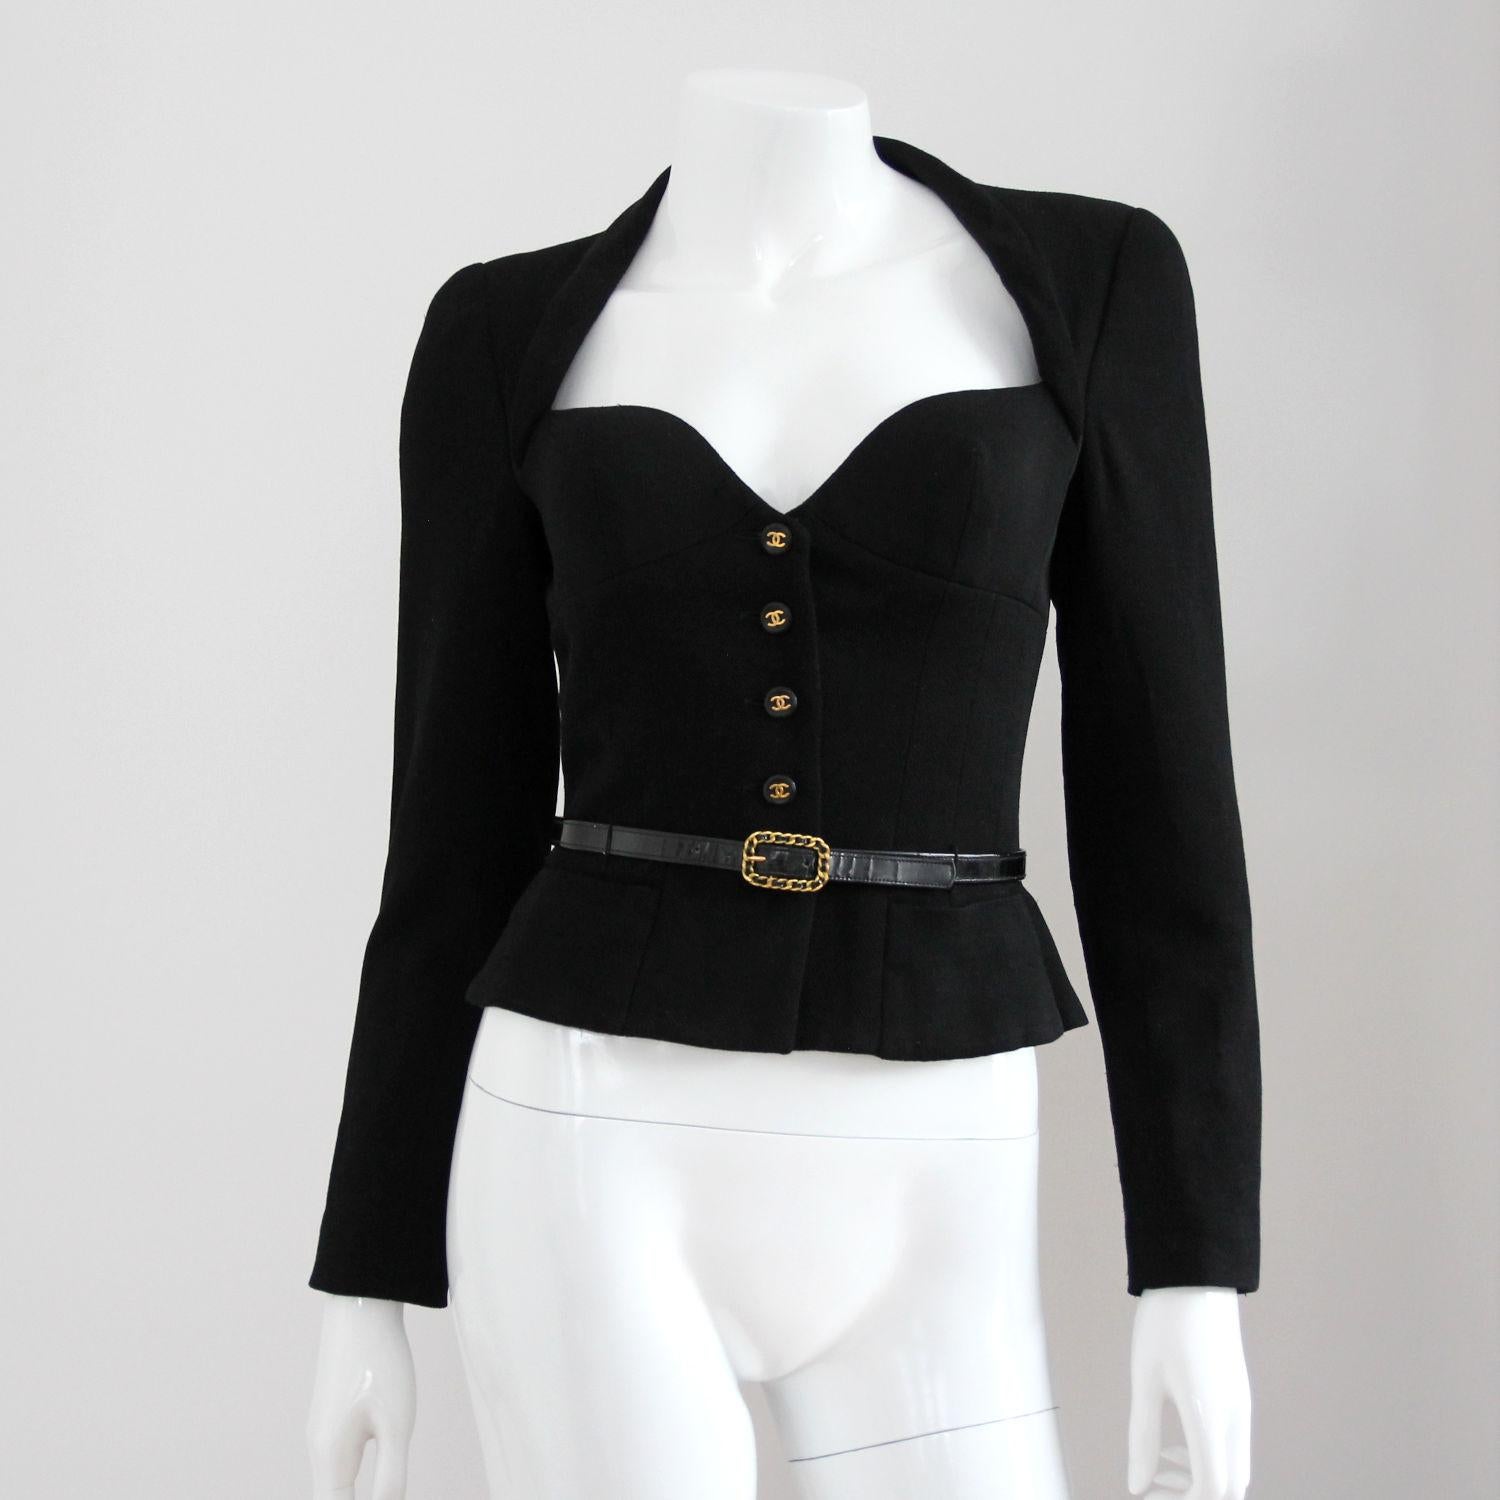 CHANEL 1995 Black Jacket with Patent Leather Belt & CC Buttons by Karl Lagerfeld 2